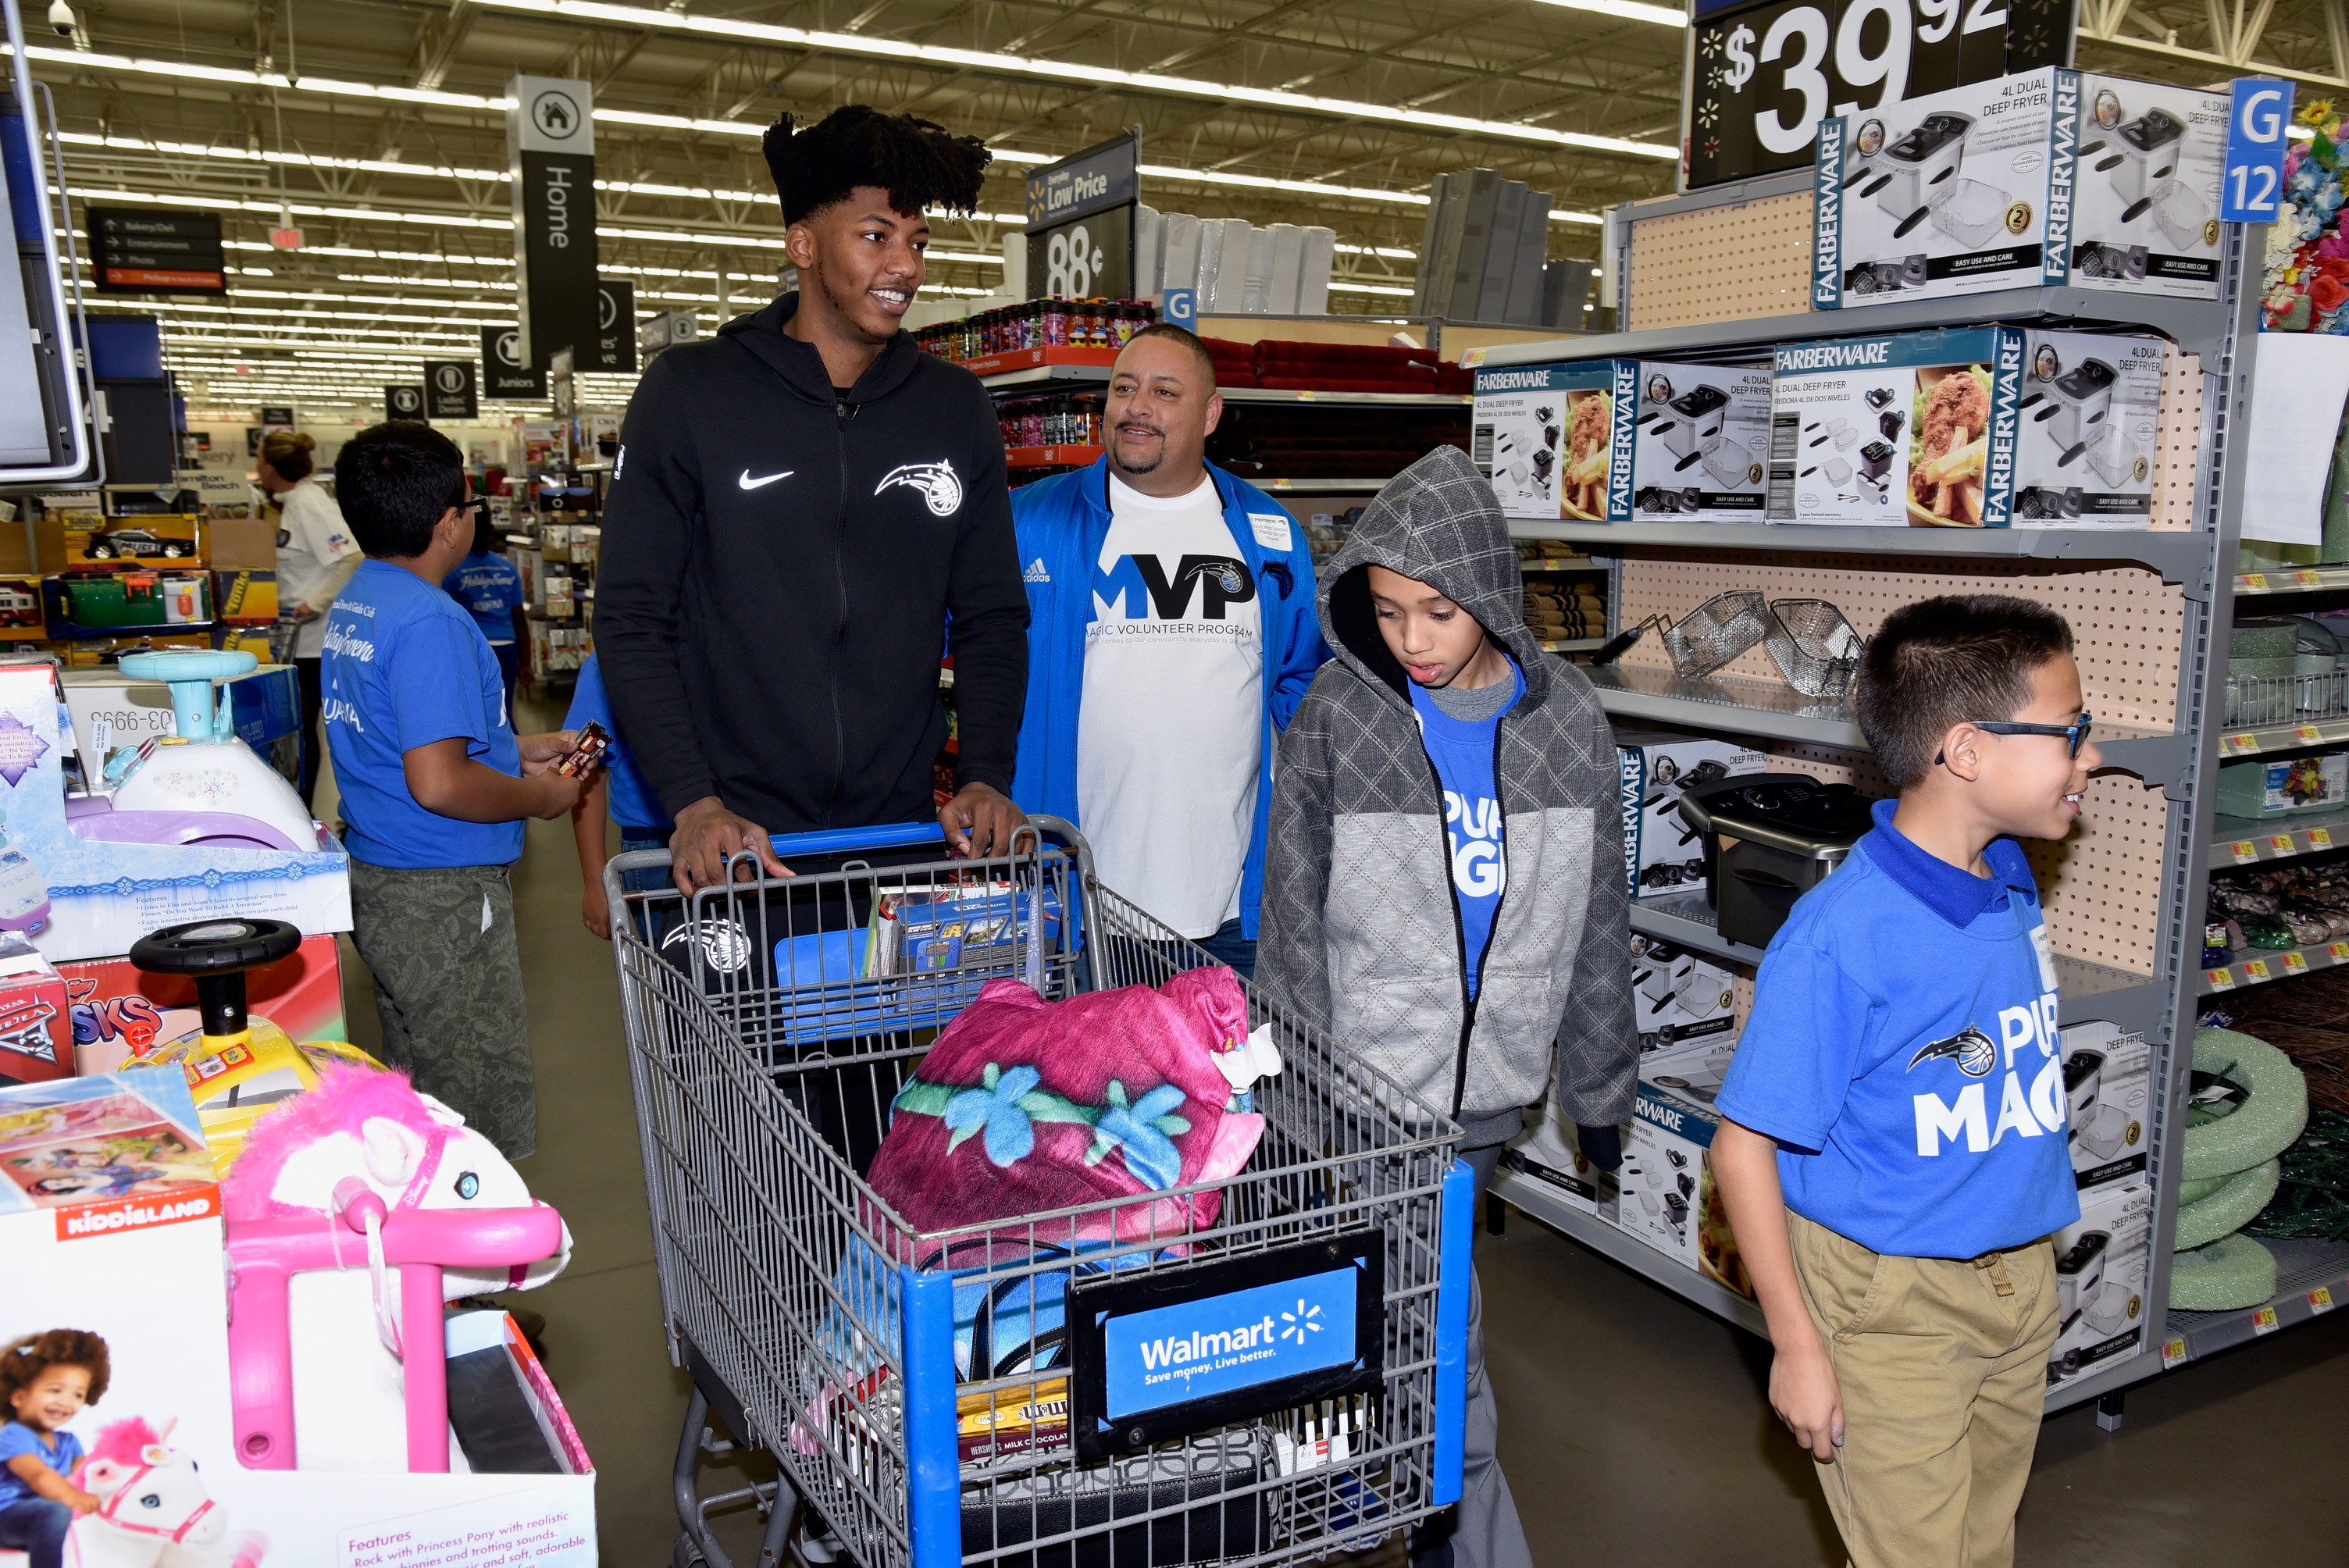 Magic player Elfrid Payton spends time with Boys & Girls Club youth at the Magic and PepsiCo. Holiday Shopping Spree on Dec. 12.

(All photos taken by Gary Bassing, Orlando Magic)